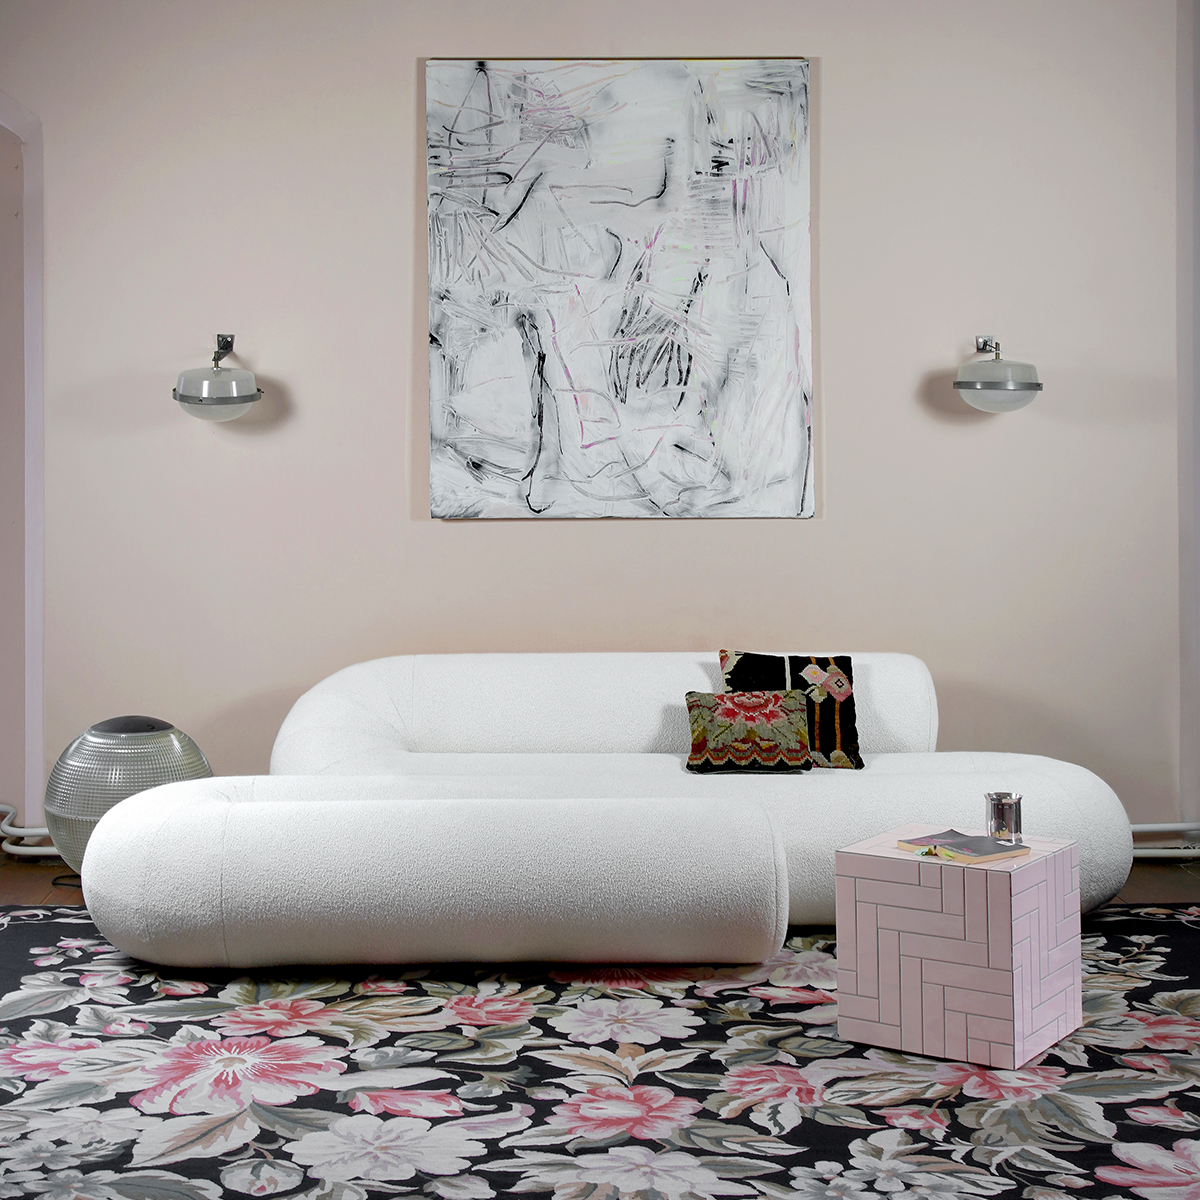 Serpentine lounge sofa system in pink fabric by Christophe de la Fontaine DANTE - Goods and Bads